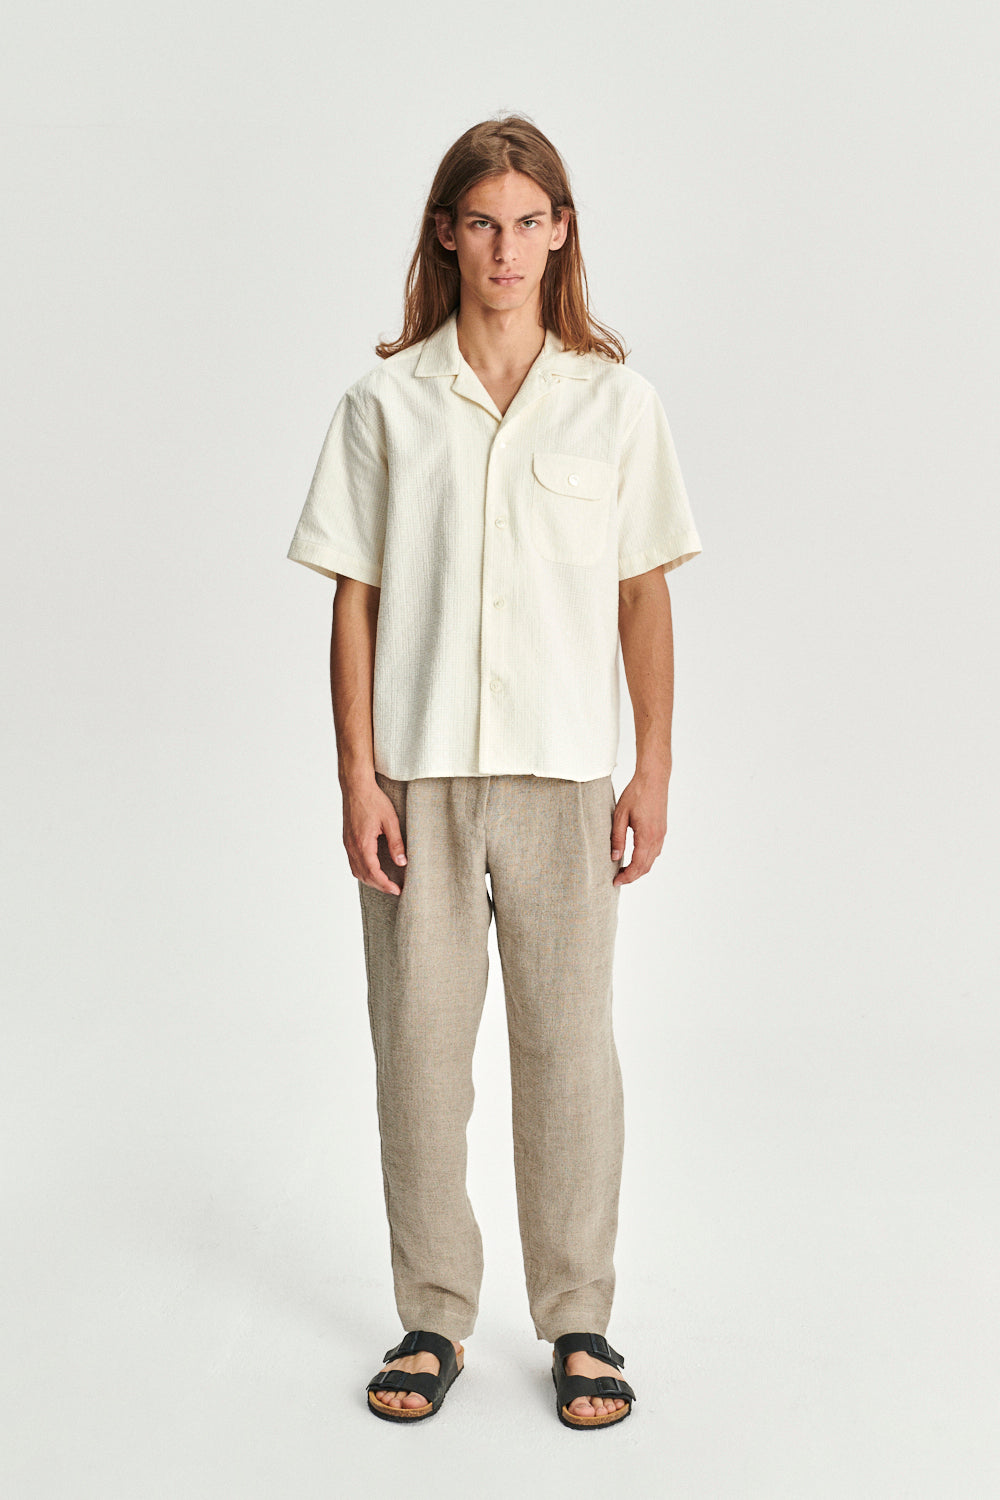 Short Sleeve Camp Collar Shirt in an  Off-white Portuguese Jacquard Cotton